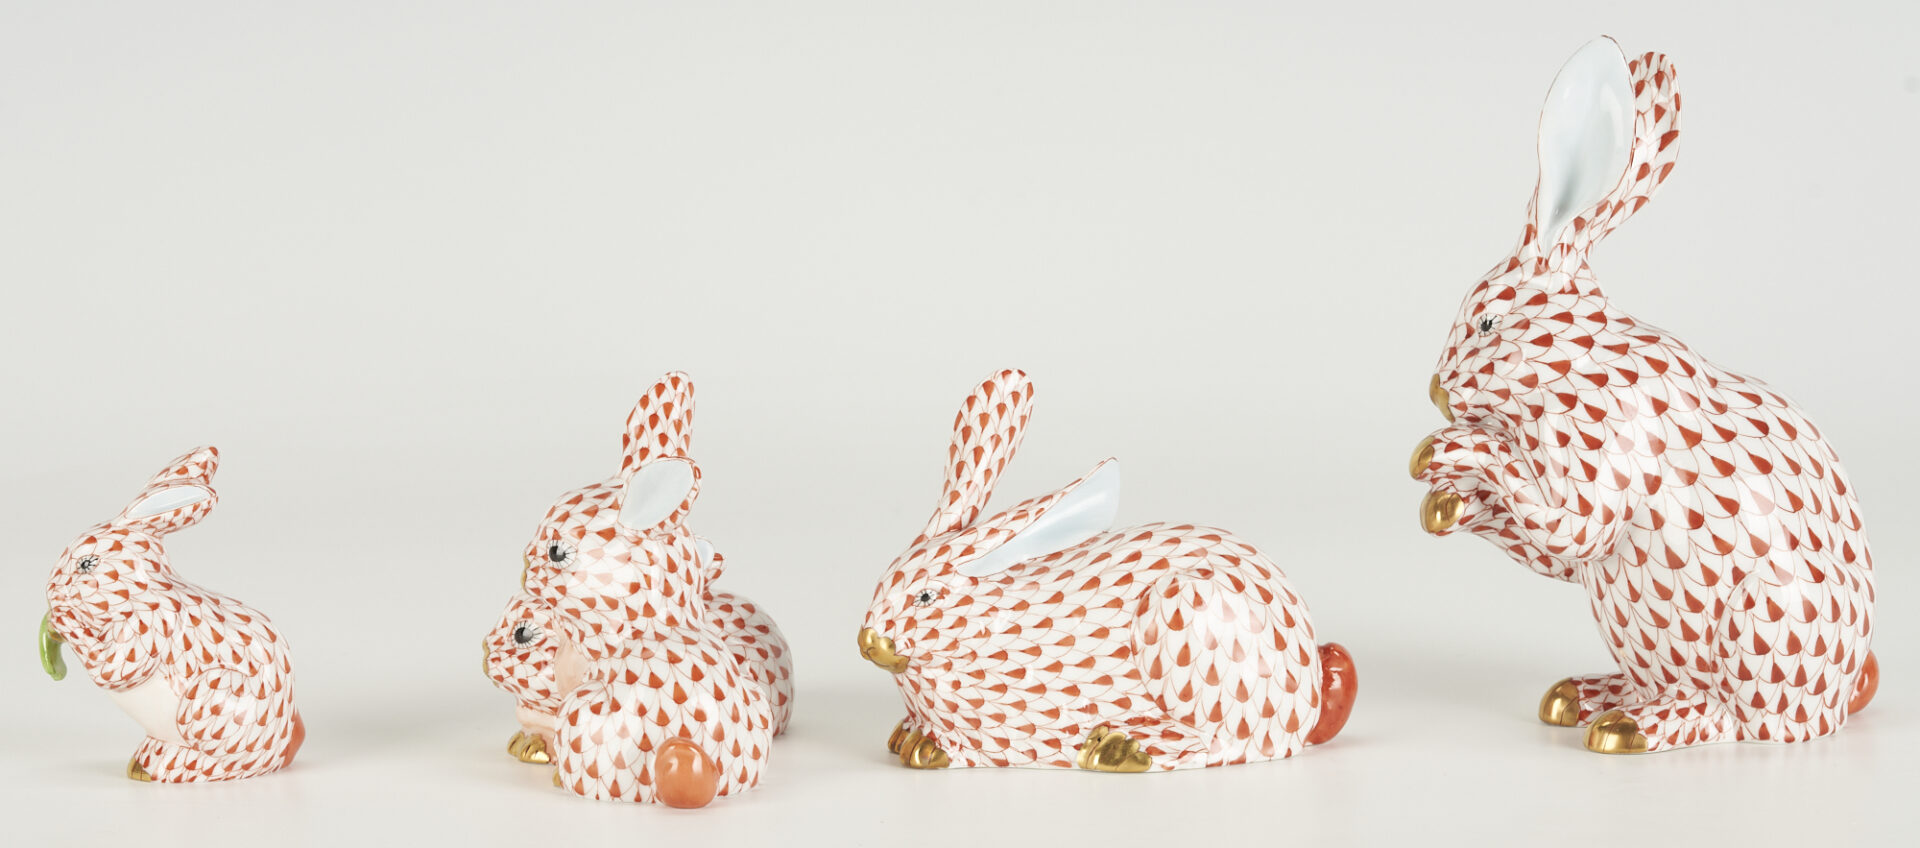 Lot 361: 8 Herend Porcelain Bunnies, Red Fishnet Decoration, incl. Bunny with Lettuce